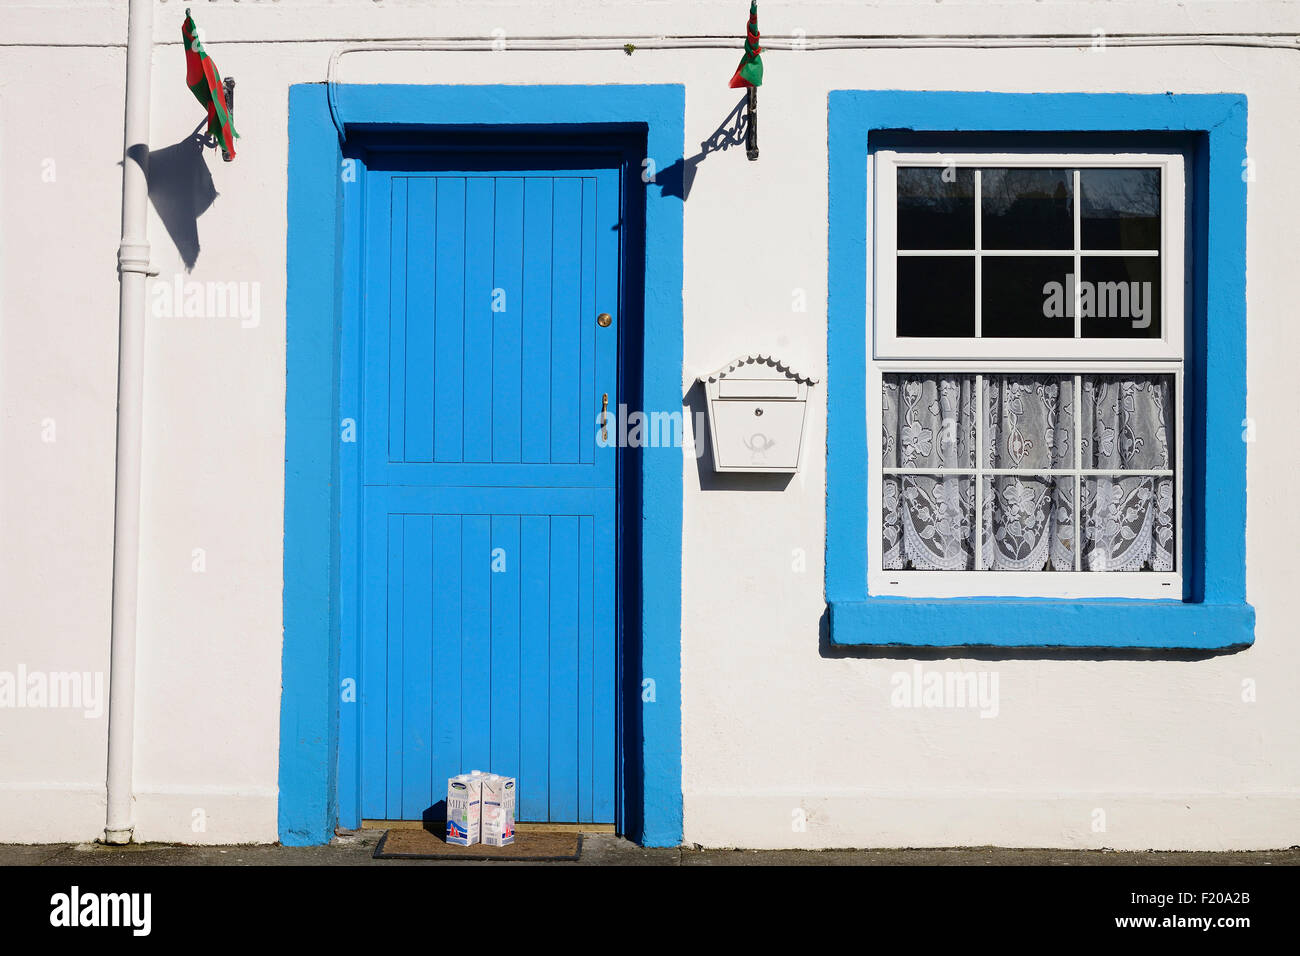 Ireland, County Mayo, Cong, Traditional house facade with cartons of milk outside the door. Stock Photo